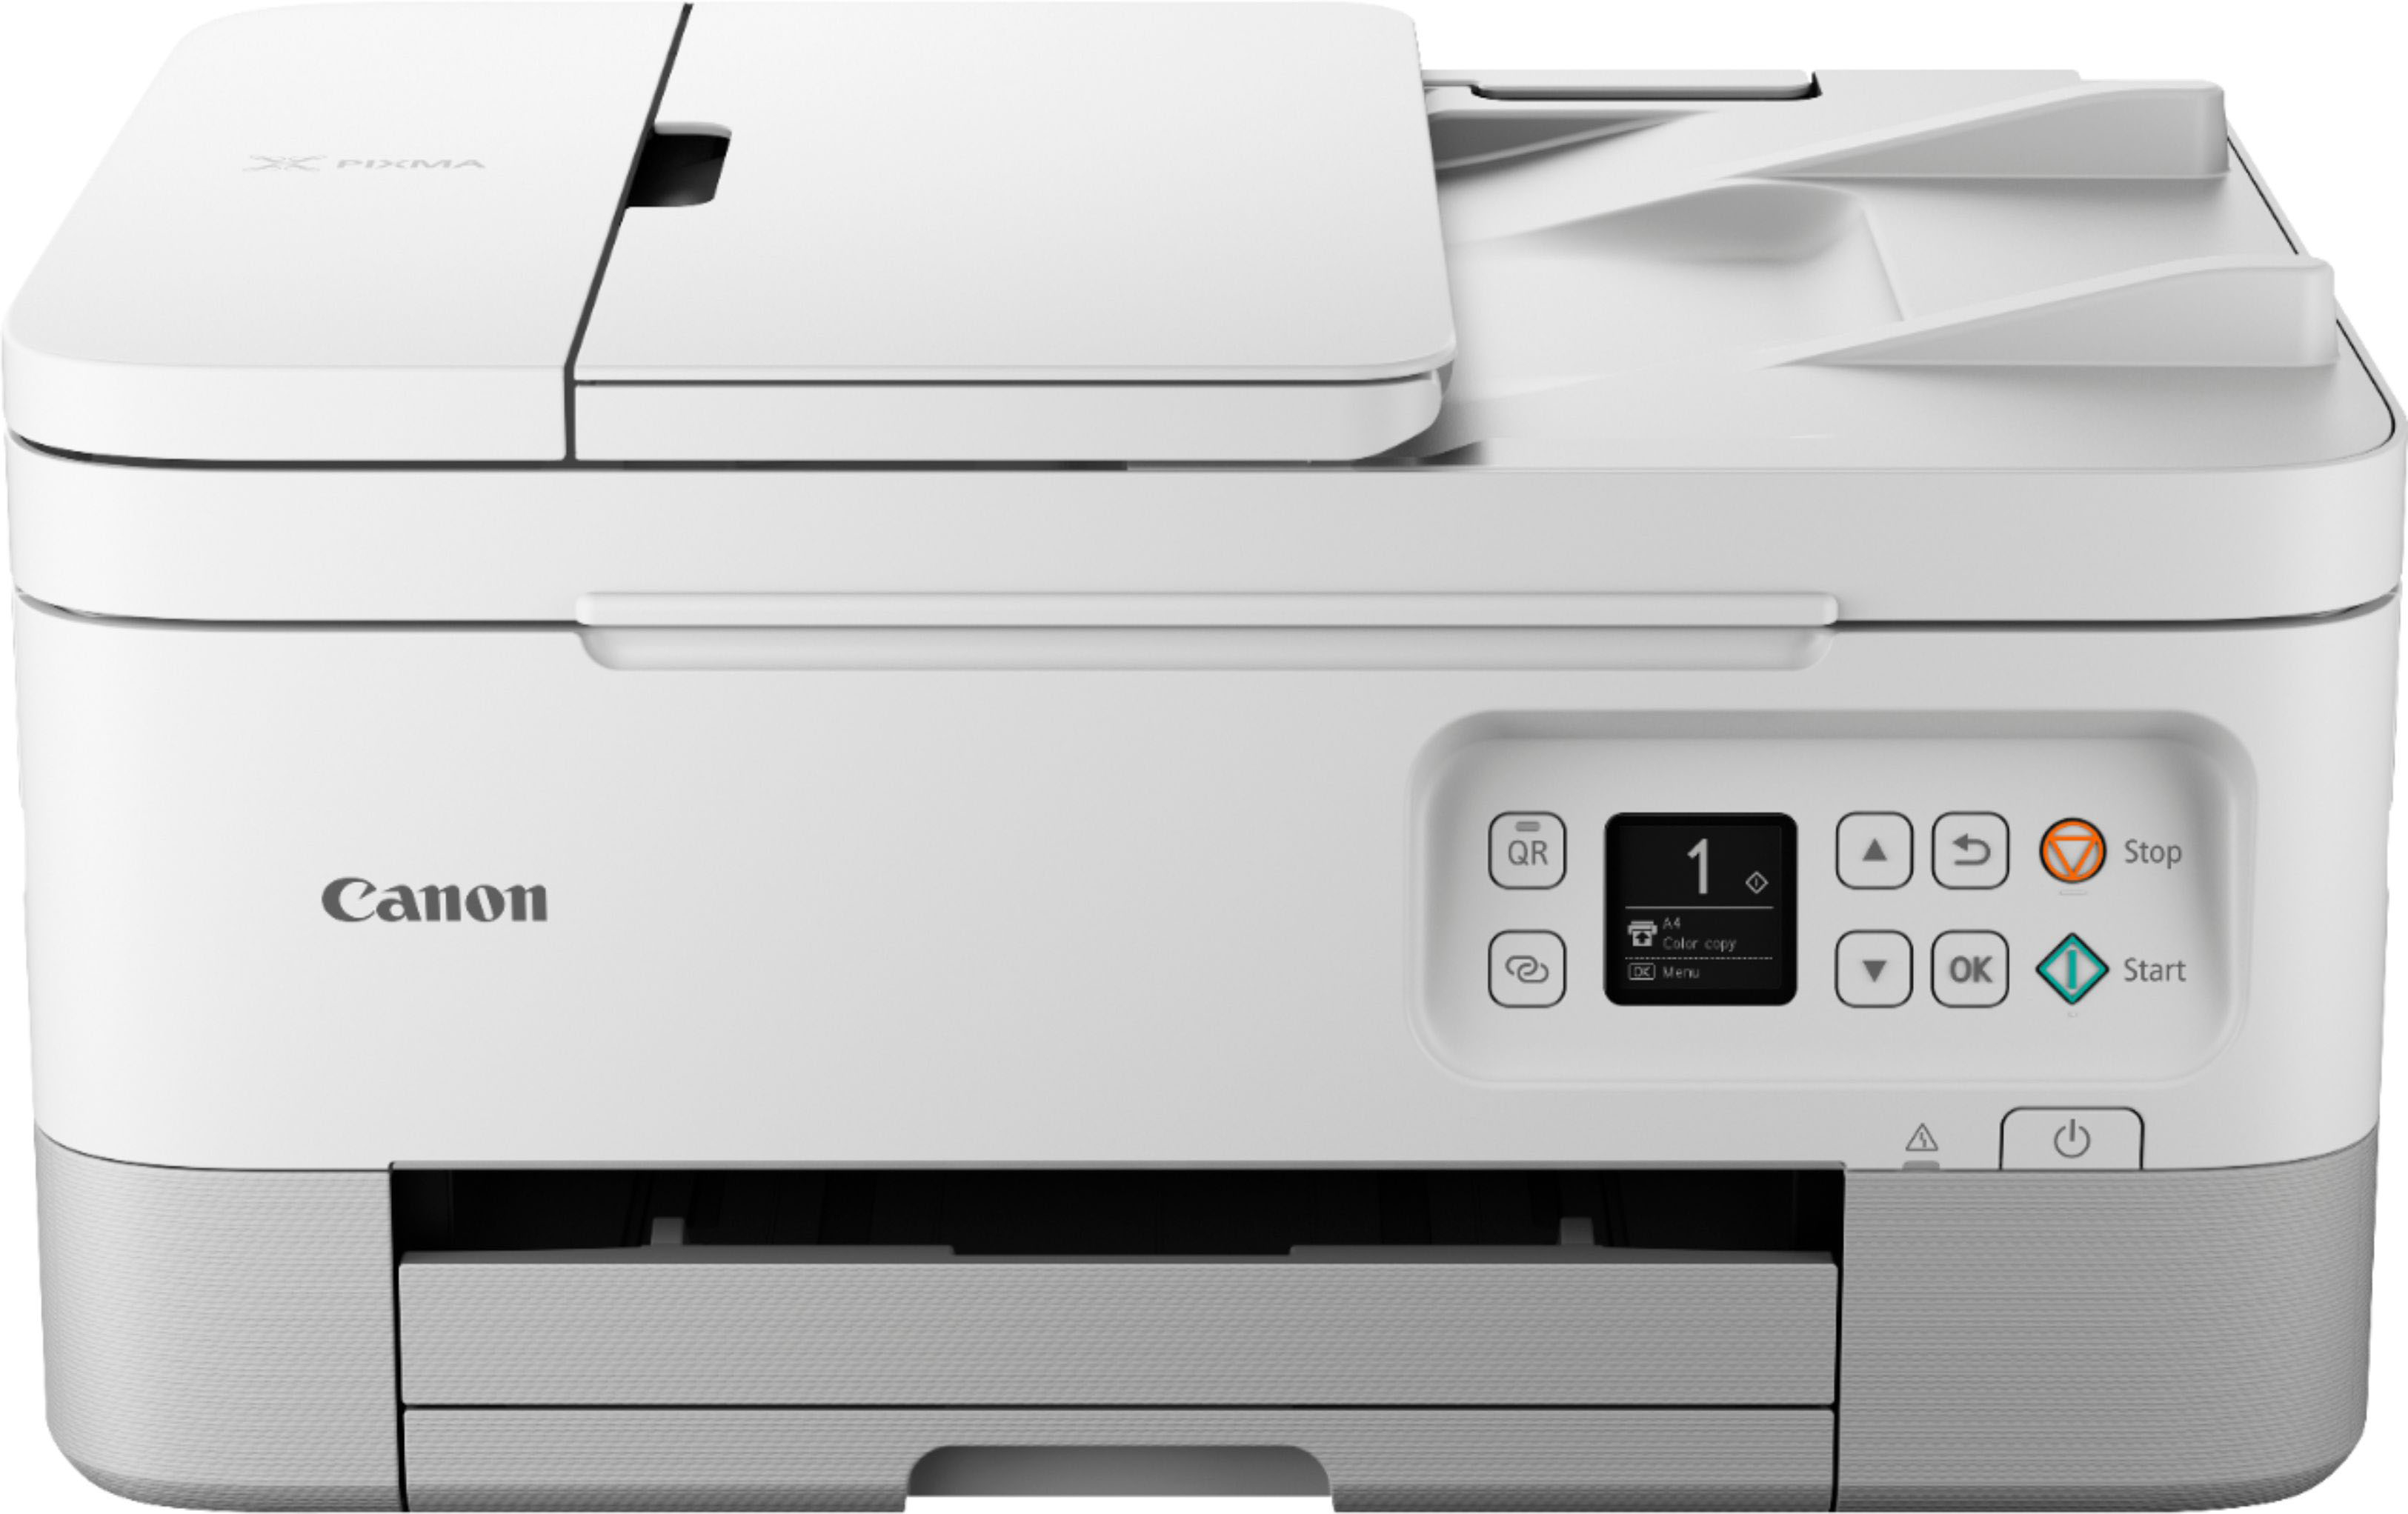 5072C008 - CANON PIXMA TR4650 All-in-One Wireless Inkjet Printer with Fax -  Currys Business